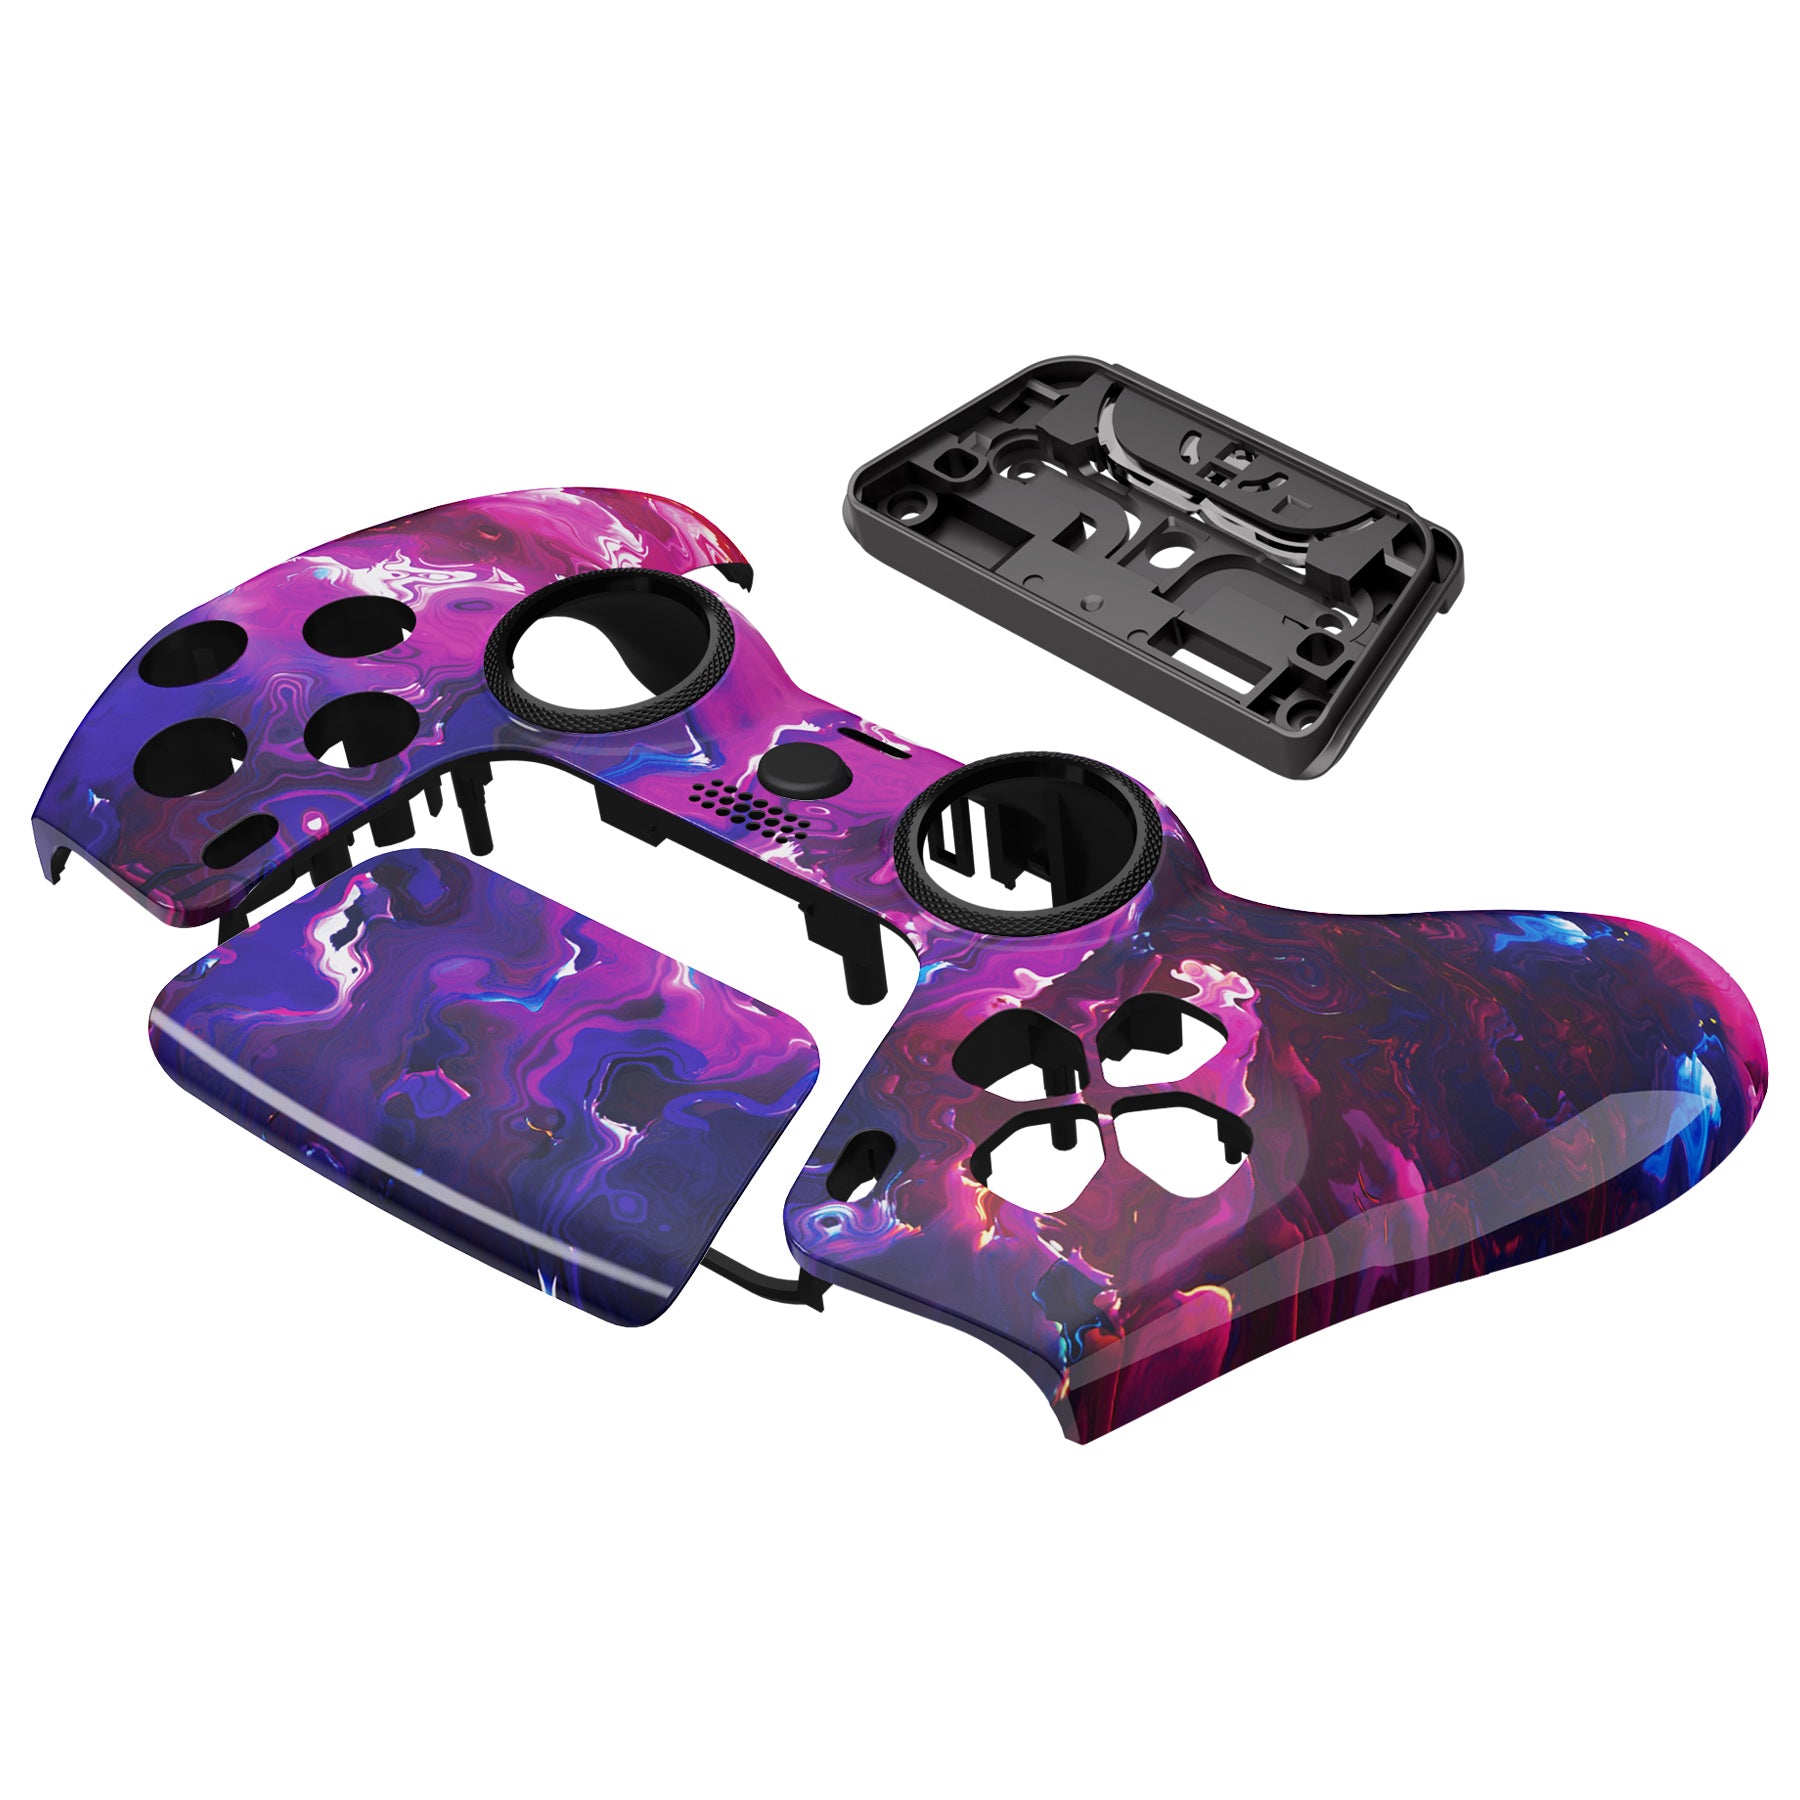 eXtremeRate LUNA Redesigned Replacement Front Shell with Touchpad Compatible with PS5 Controller BDM-010/020/030/040 - Surreal Lava eXtremeRate